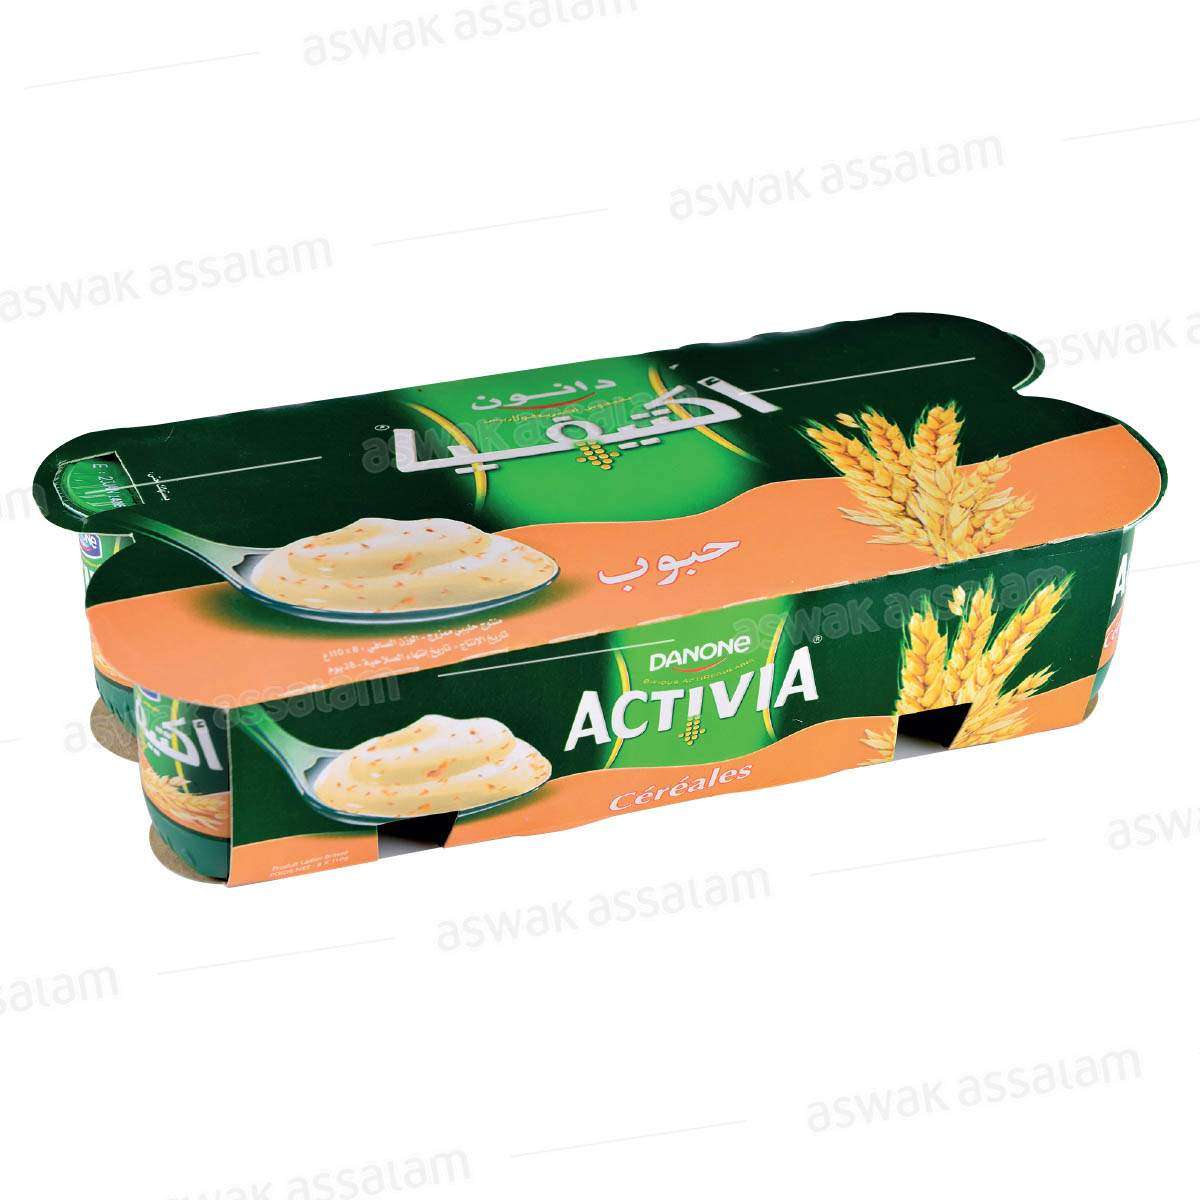 YAOURT ACTIVIA CEREALES 8*110G PACK DANONE